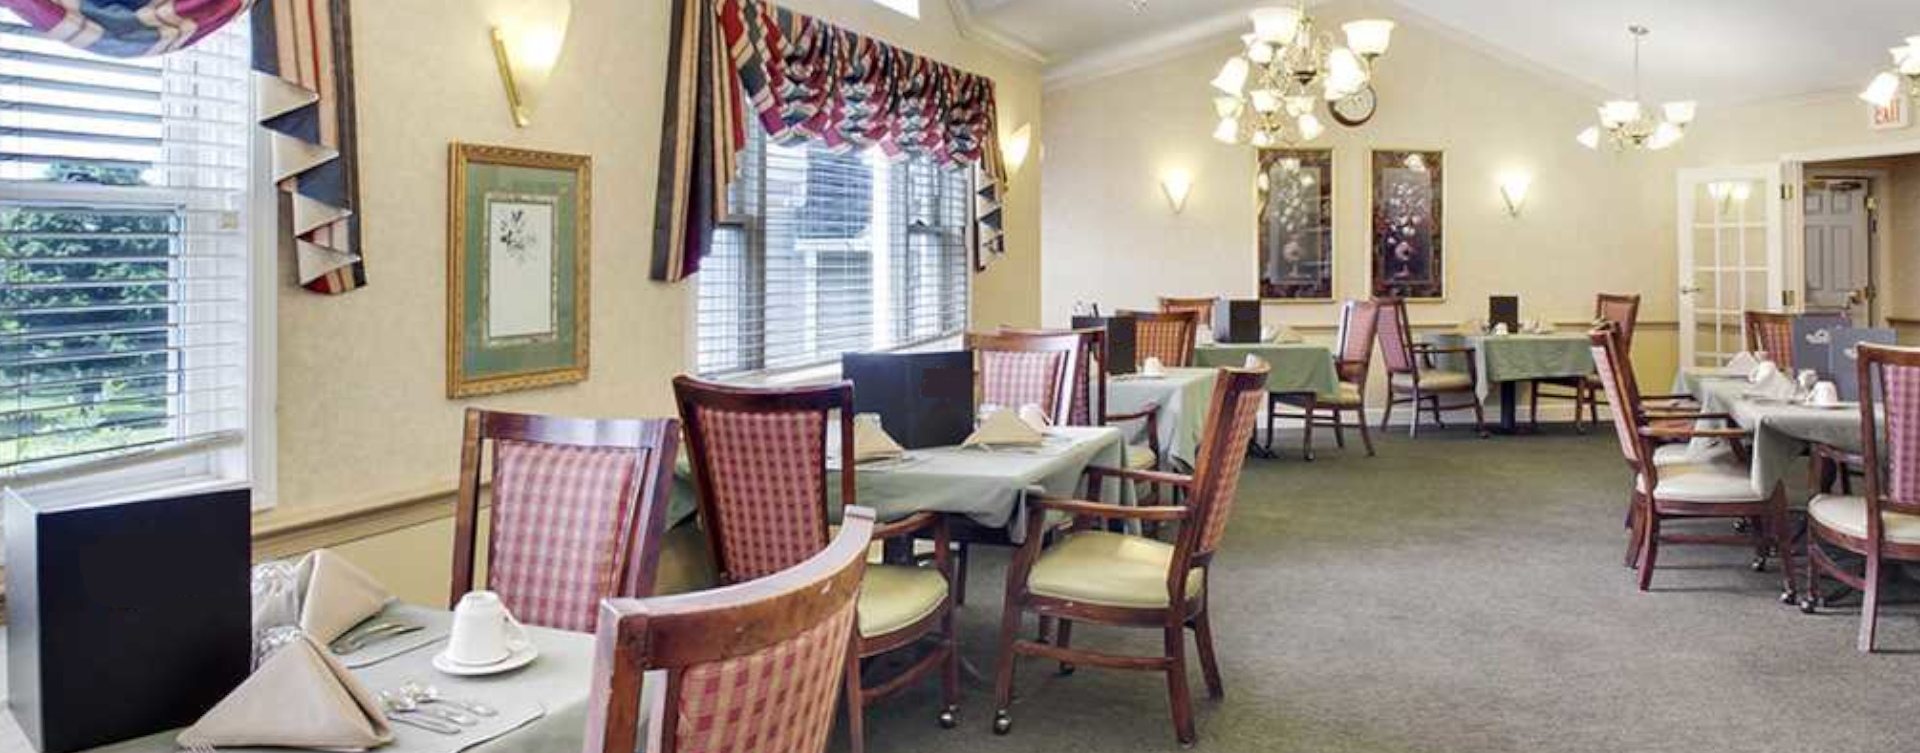 Enjoy restaurant -style meals served three times a day in our dining room at Bickford of Scioto